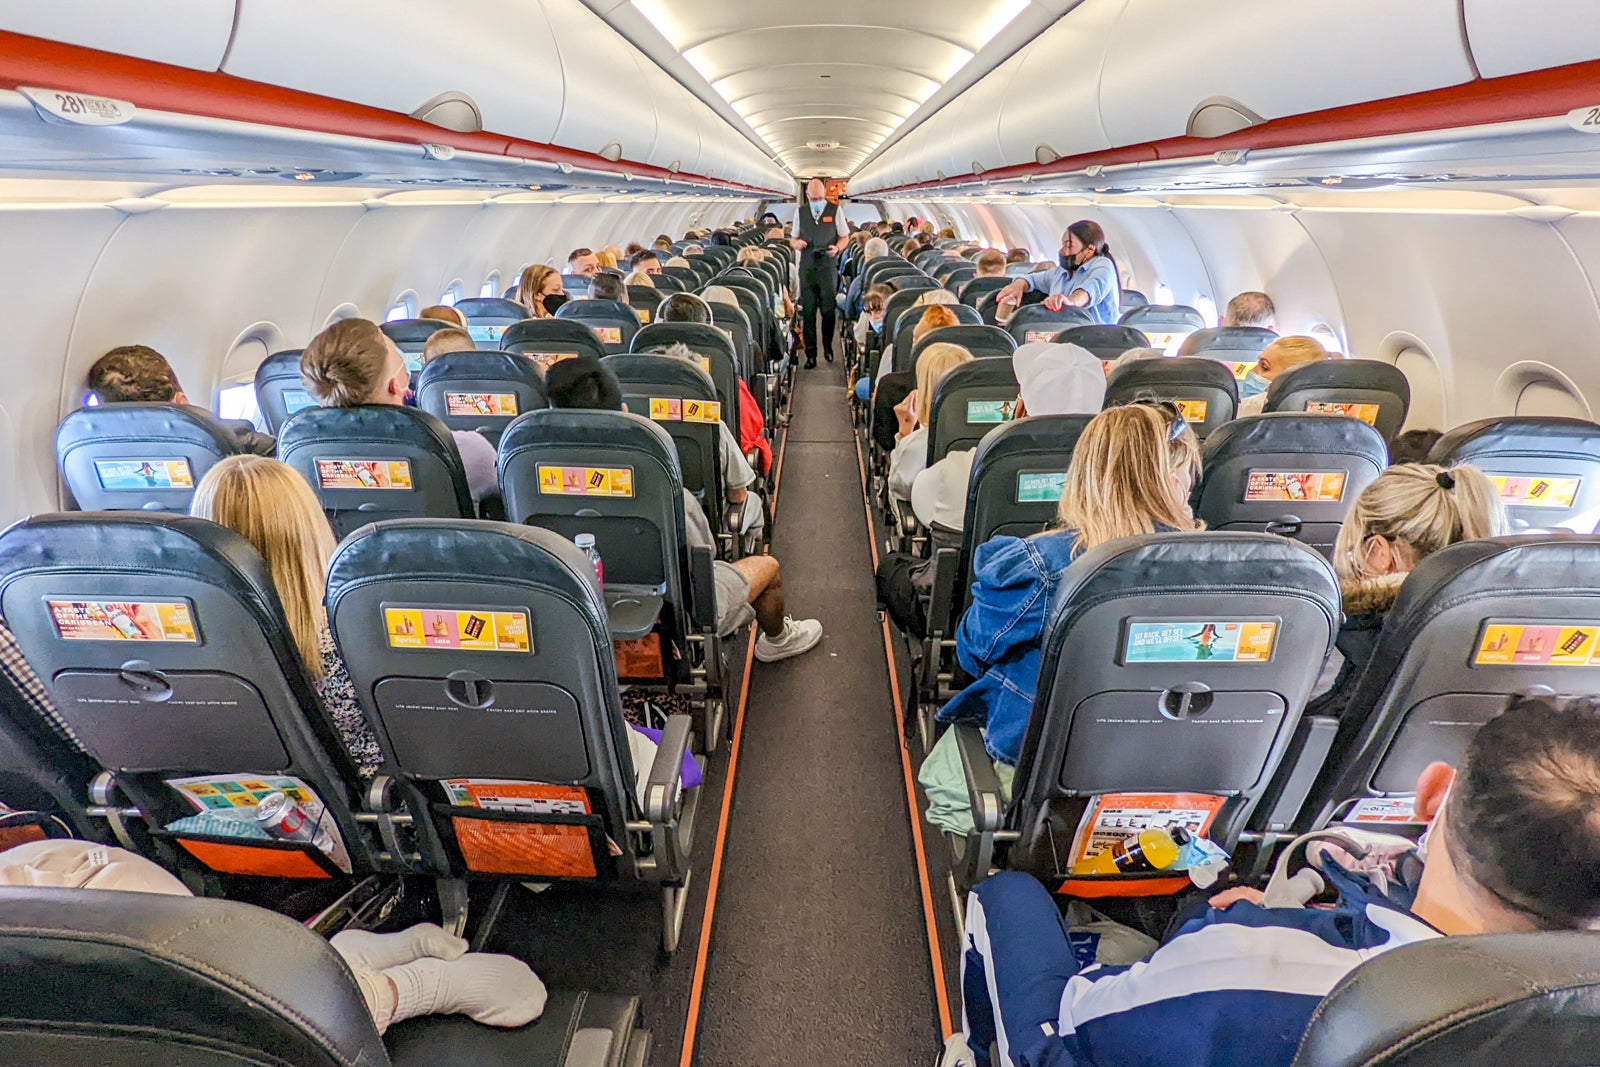 Lessons learned from 6 hours on EasyJet's longest flight